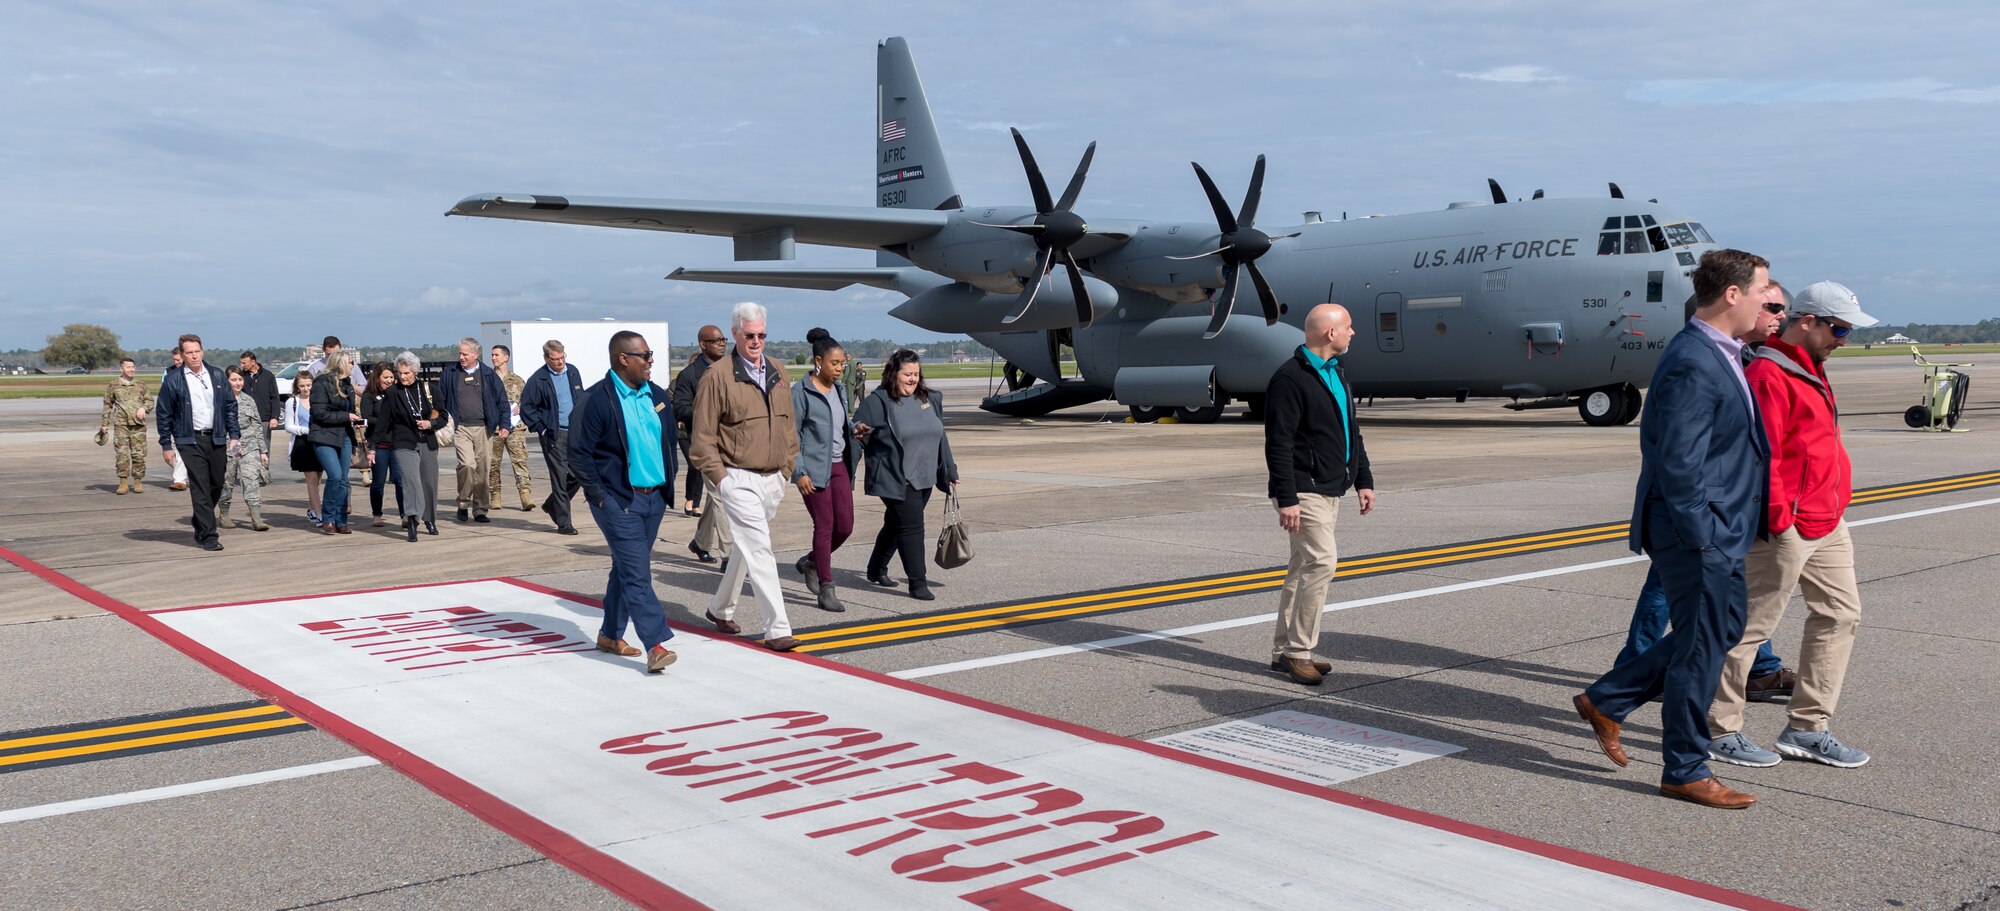 Keesler honorary commanders exit the flight line following a static display tour of a WC-130J Hercules during the 403rd Wing Honorary Commanders Tour at Keesler Air Force Base, Mississippi, March 08, 2019. The tour was intended to familiarize honorary commanders with the 403rd Wing and the Air Force Reserve mission and capabilities. The event also included an incentive flight on a WC-130J Hercules. (U.S. Air Force Photo by Andre' Askew)